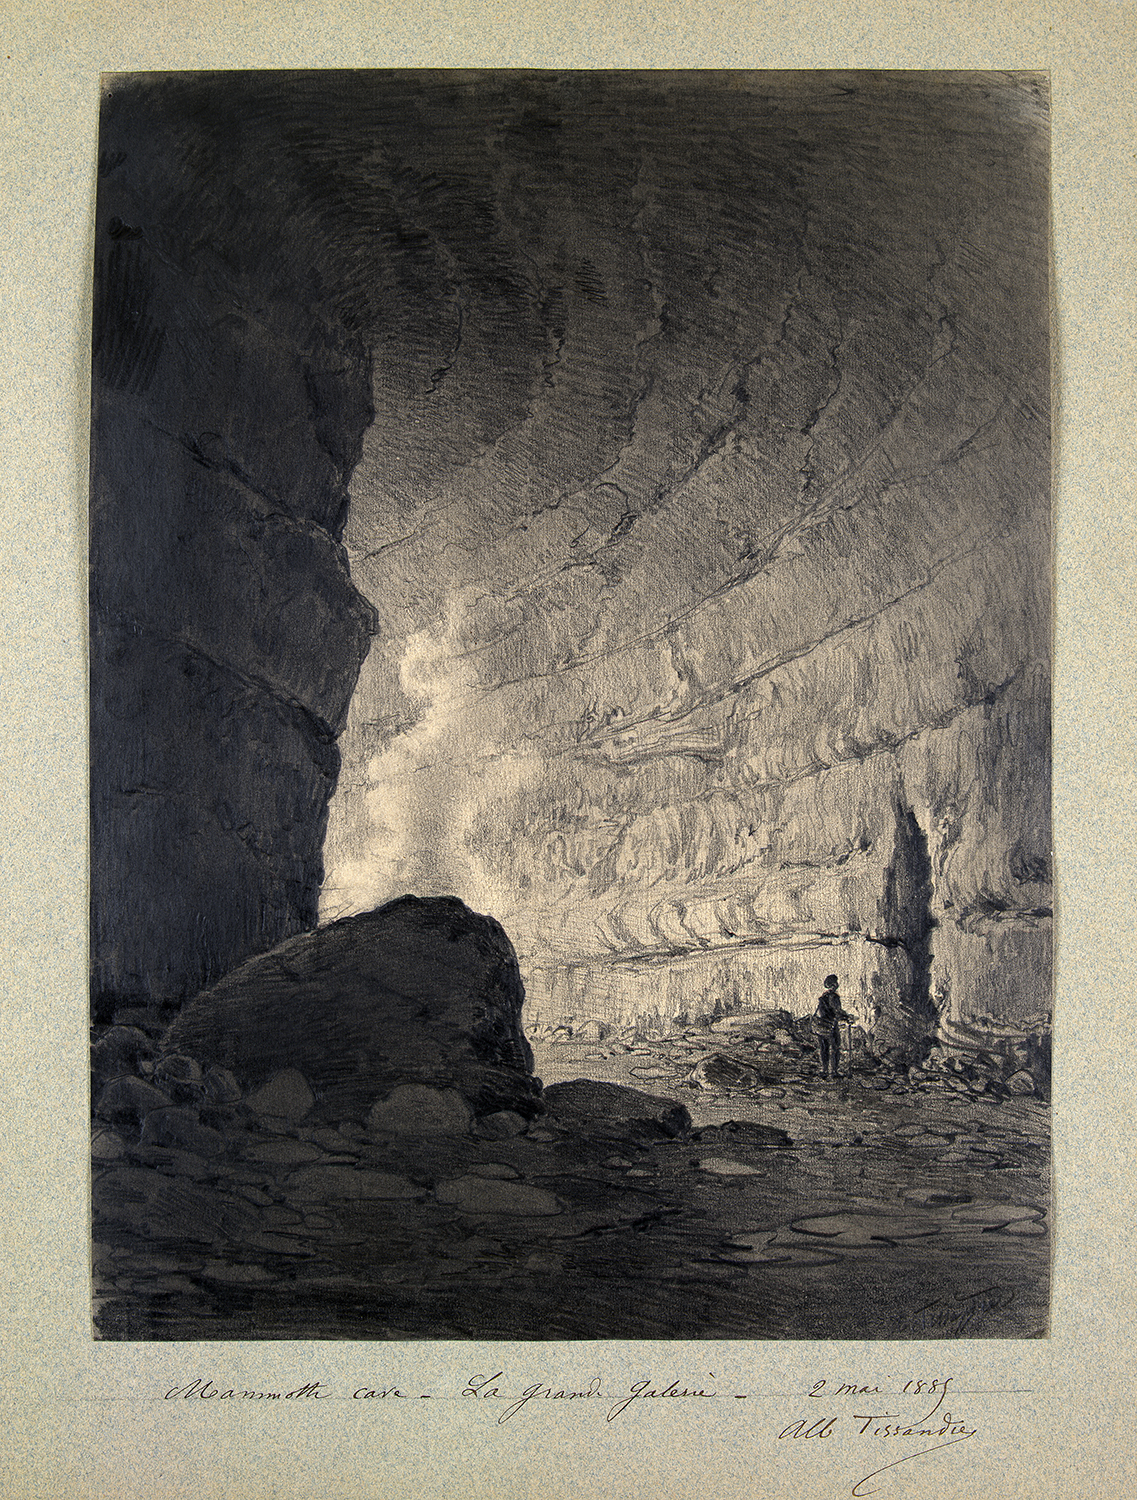 Albert Charles Tissandier, Mammoth Cave¬—The Grand Gallery, 1885, purchased with funds from Friends of the Art Museum, UMFA1978.289